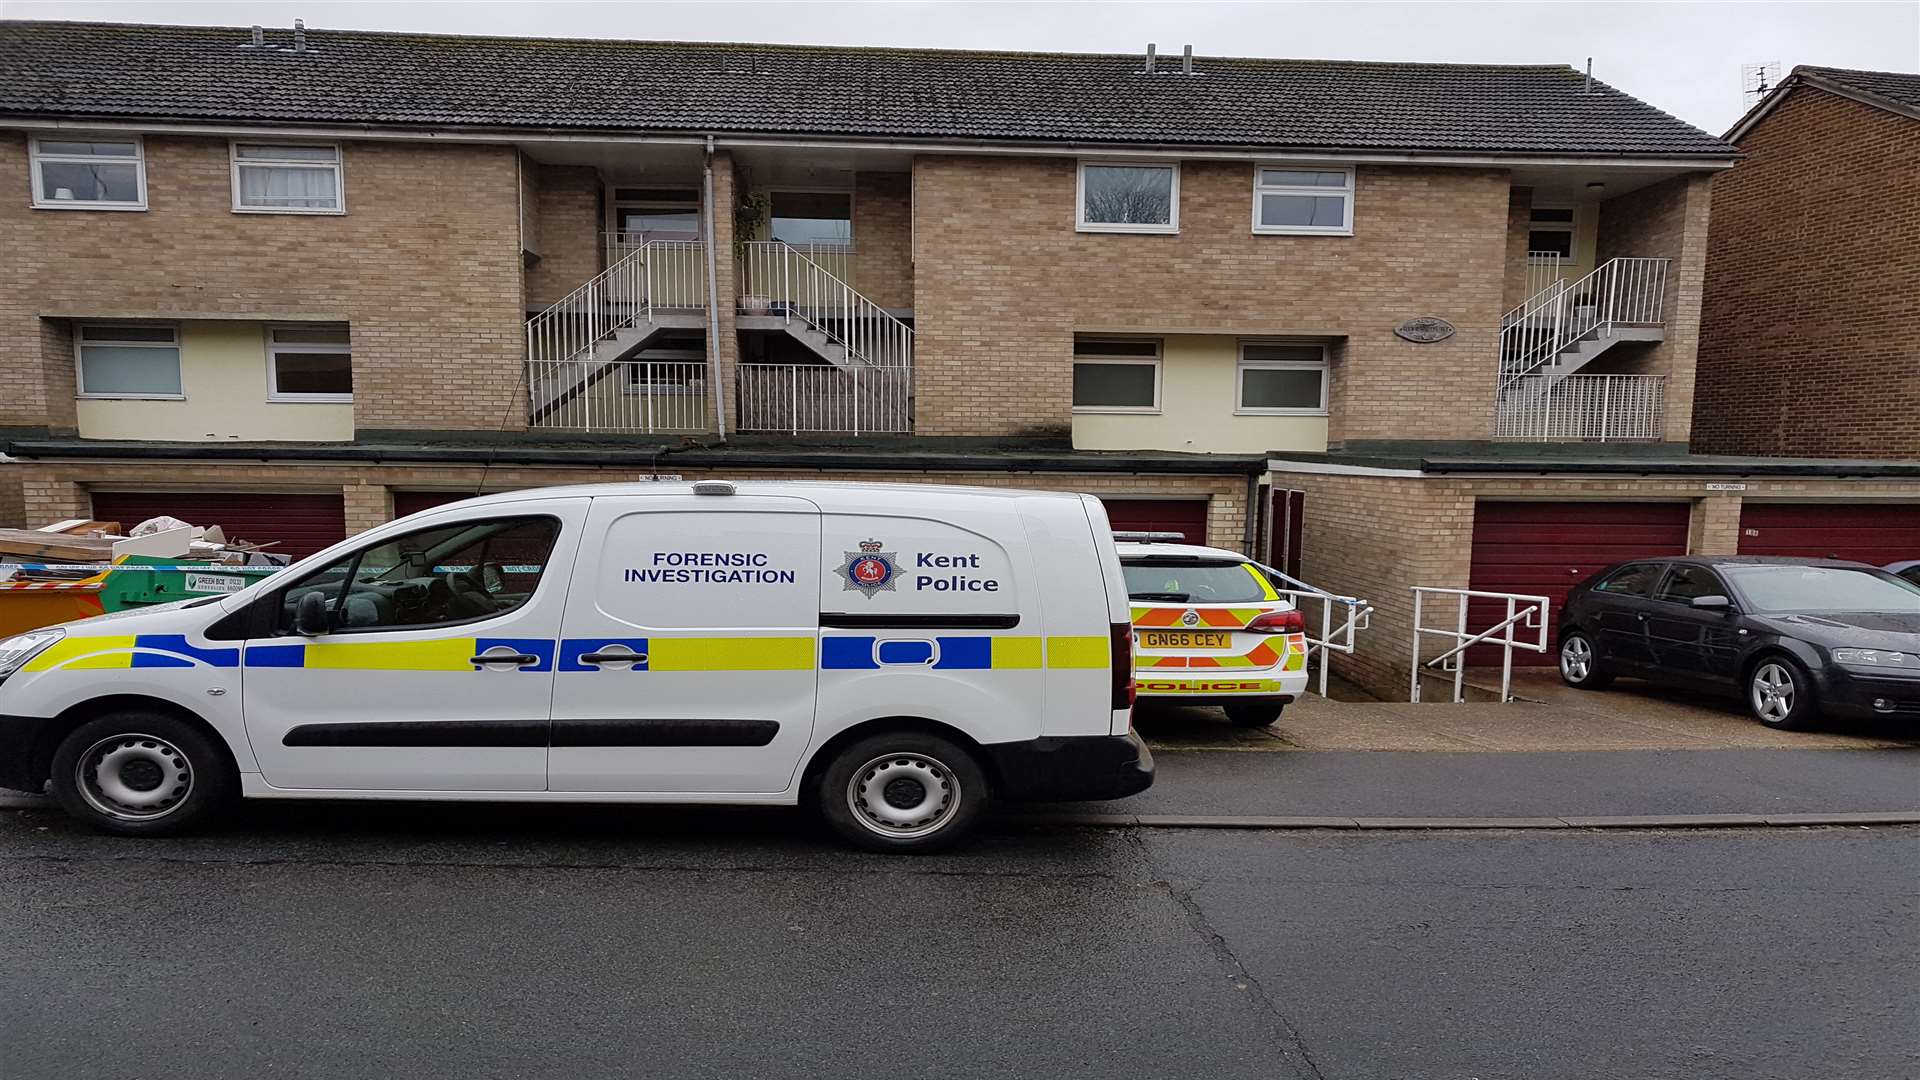 Forensic investigators are at the scene of an ongoing incident in Maidstone.